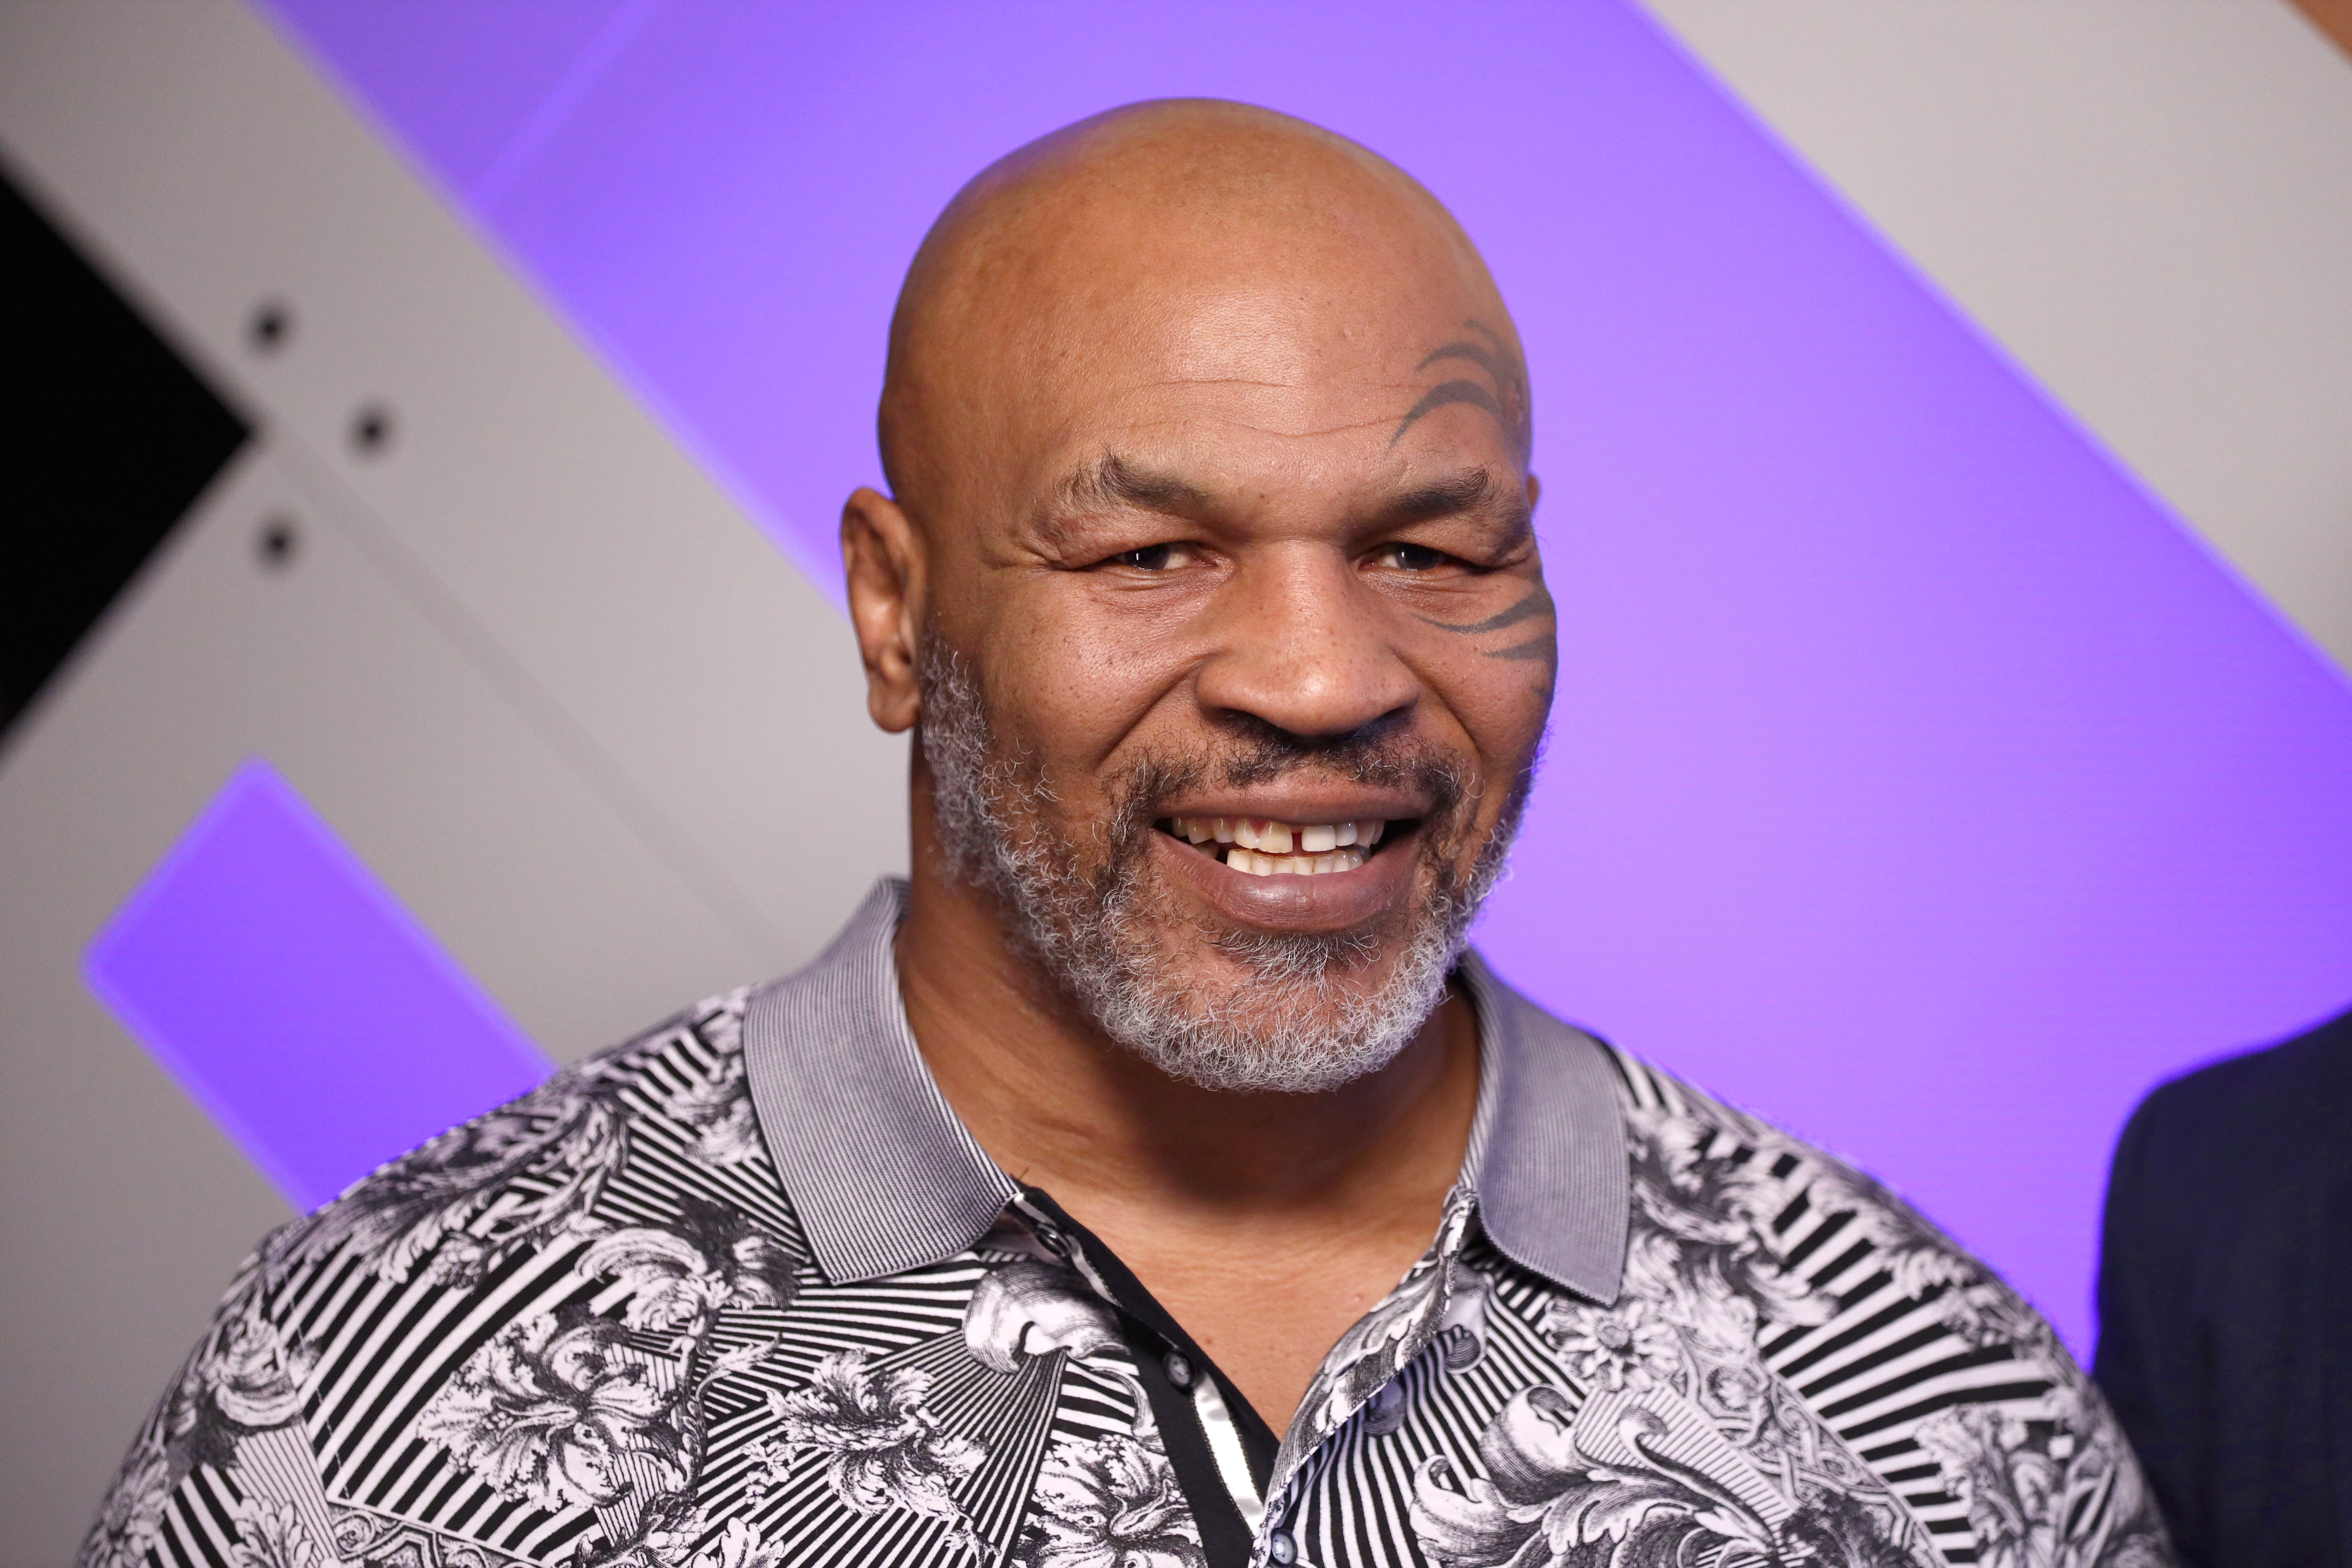 Mike Tyson during the 2019 iHeartRadio Podcast Awards at the iHeartRadio Theater LA on January 18, 2019. | Photo: Getty Images